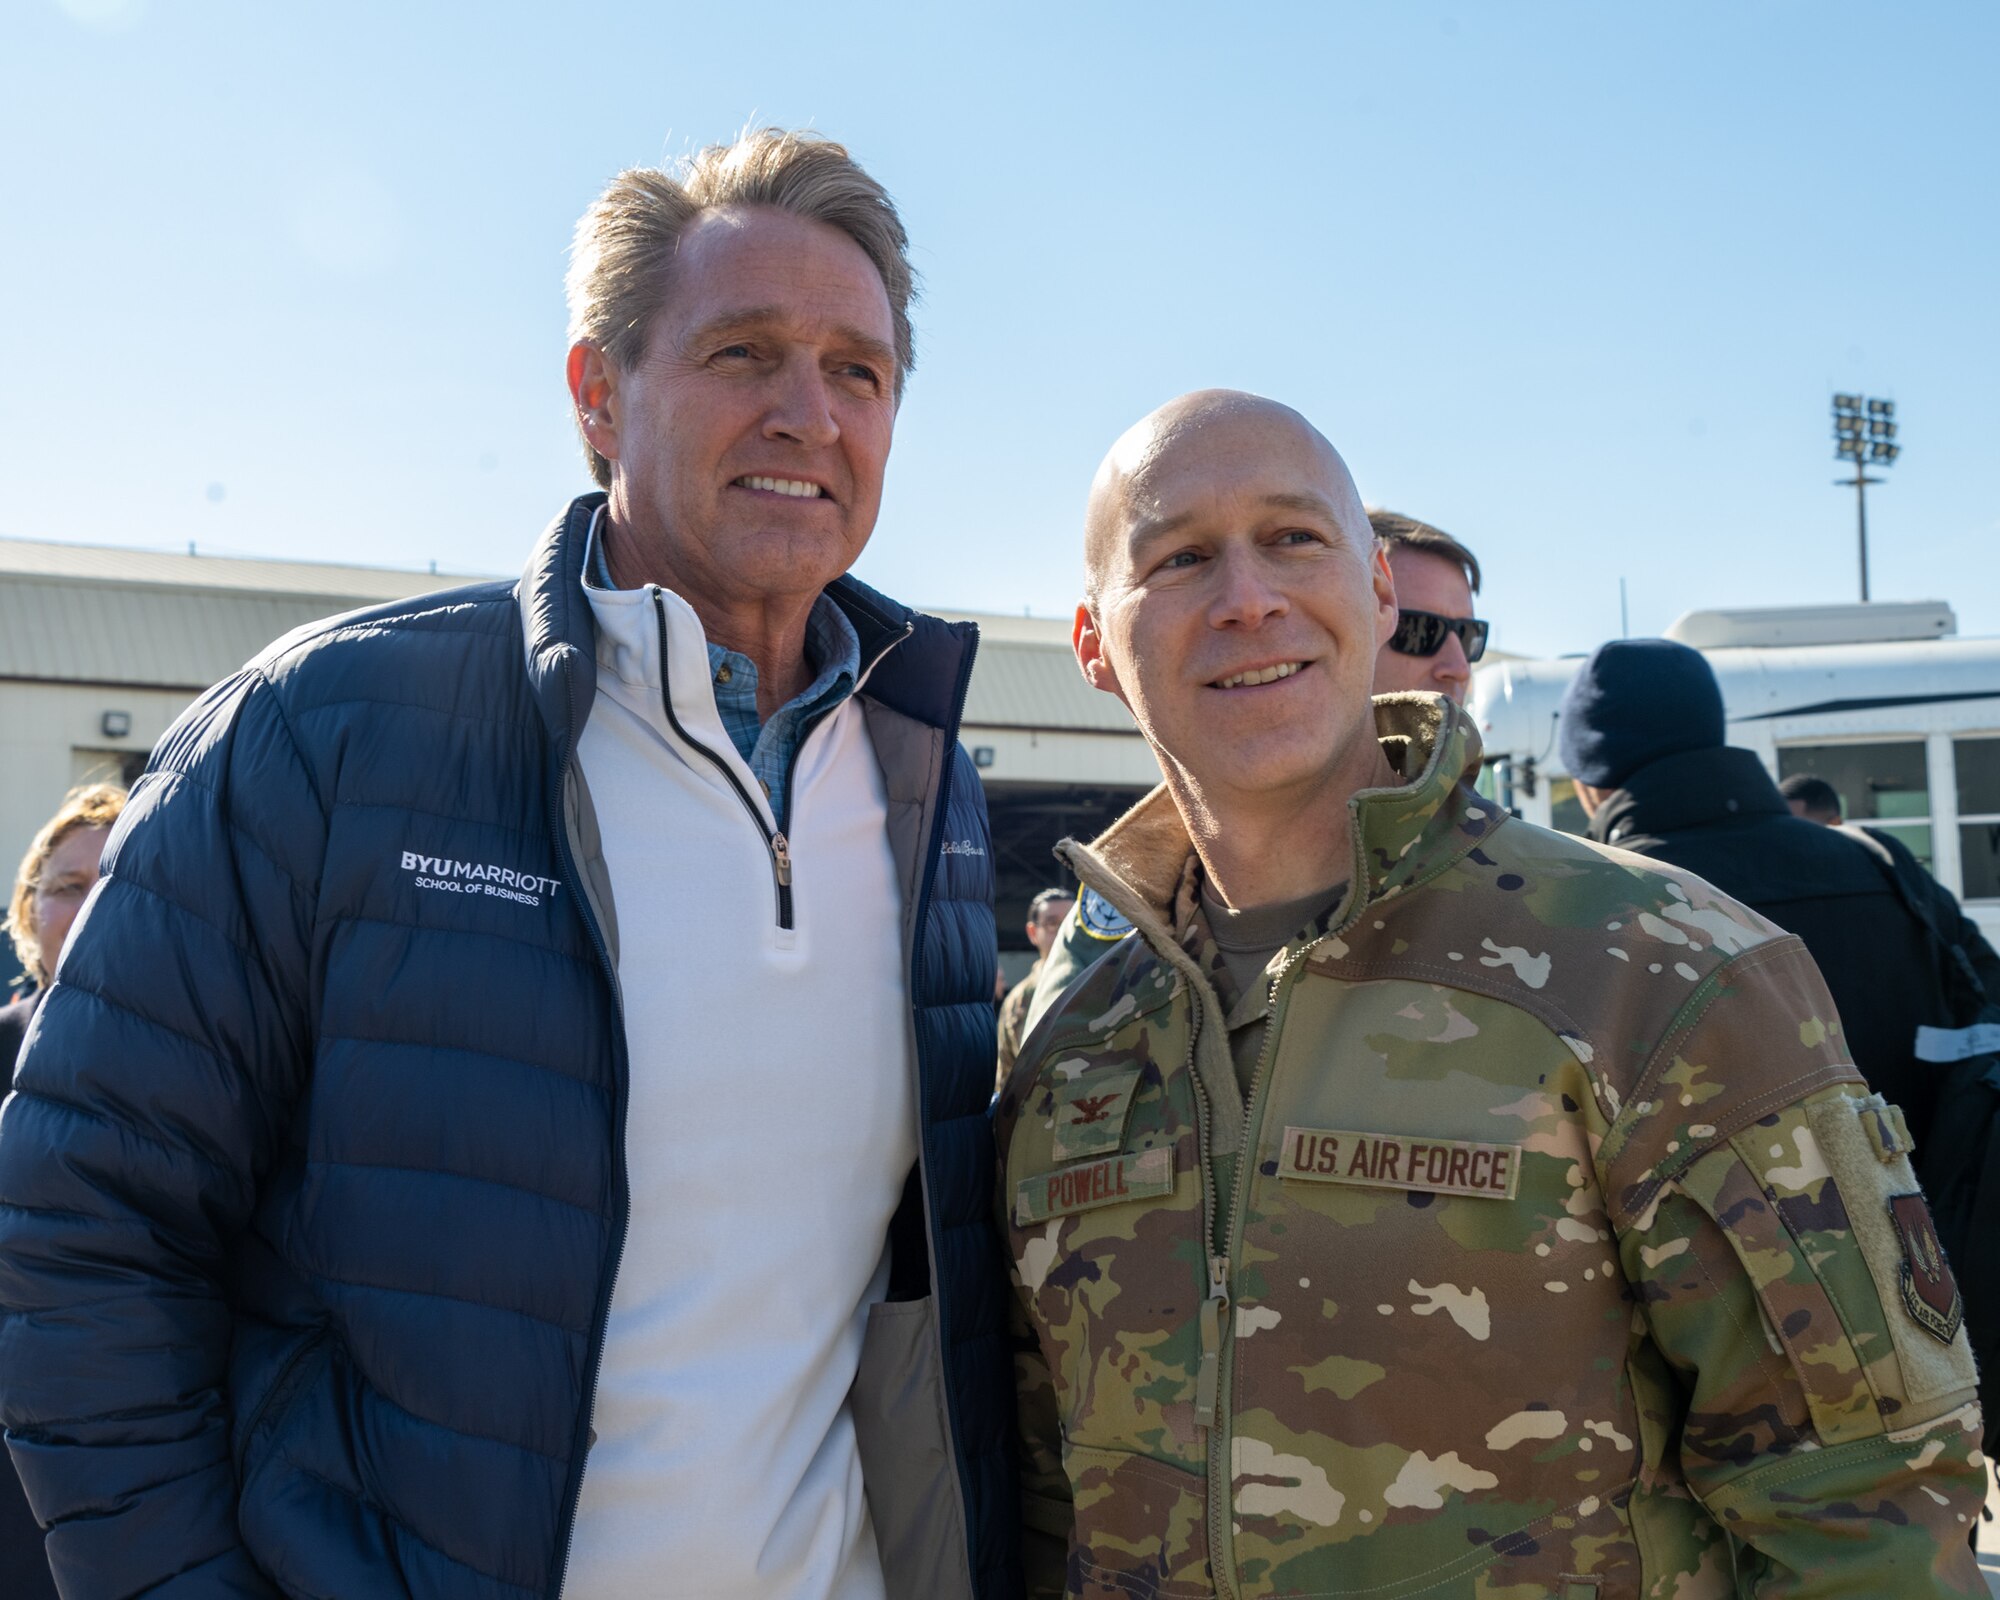 U.S. Ambassador Jeffry Flake, U.S. Ambassador to Türkiye, left, poses for a photograph with U.S. Air Force Col. Calvin B. Powell, 39th Air Base Wing commander, right, after his arrival at Incirlik Air Base, Türkiye, Feb 8, 2023. Ambassador Flake visited Incirlik AB to greet members of the United States Agency for International Development’s Disaster Assistance Response Team, following a series of earthquakes that struck central-southern Türkiye on Feb 6, 2023. As Ambassador to Türkiye, Flake holds the highest civilian position as The Chief of Mission, and impacts the communication and resources of U.S. personnel, advancing the U.S. foreign policy goals. As a fellow NATO ally, the U.S. Government mobilized personnel to assist in Türkiye in their response efforts. (U.S. Air Force photo by Senior Airman David D. McLoney)